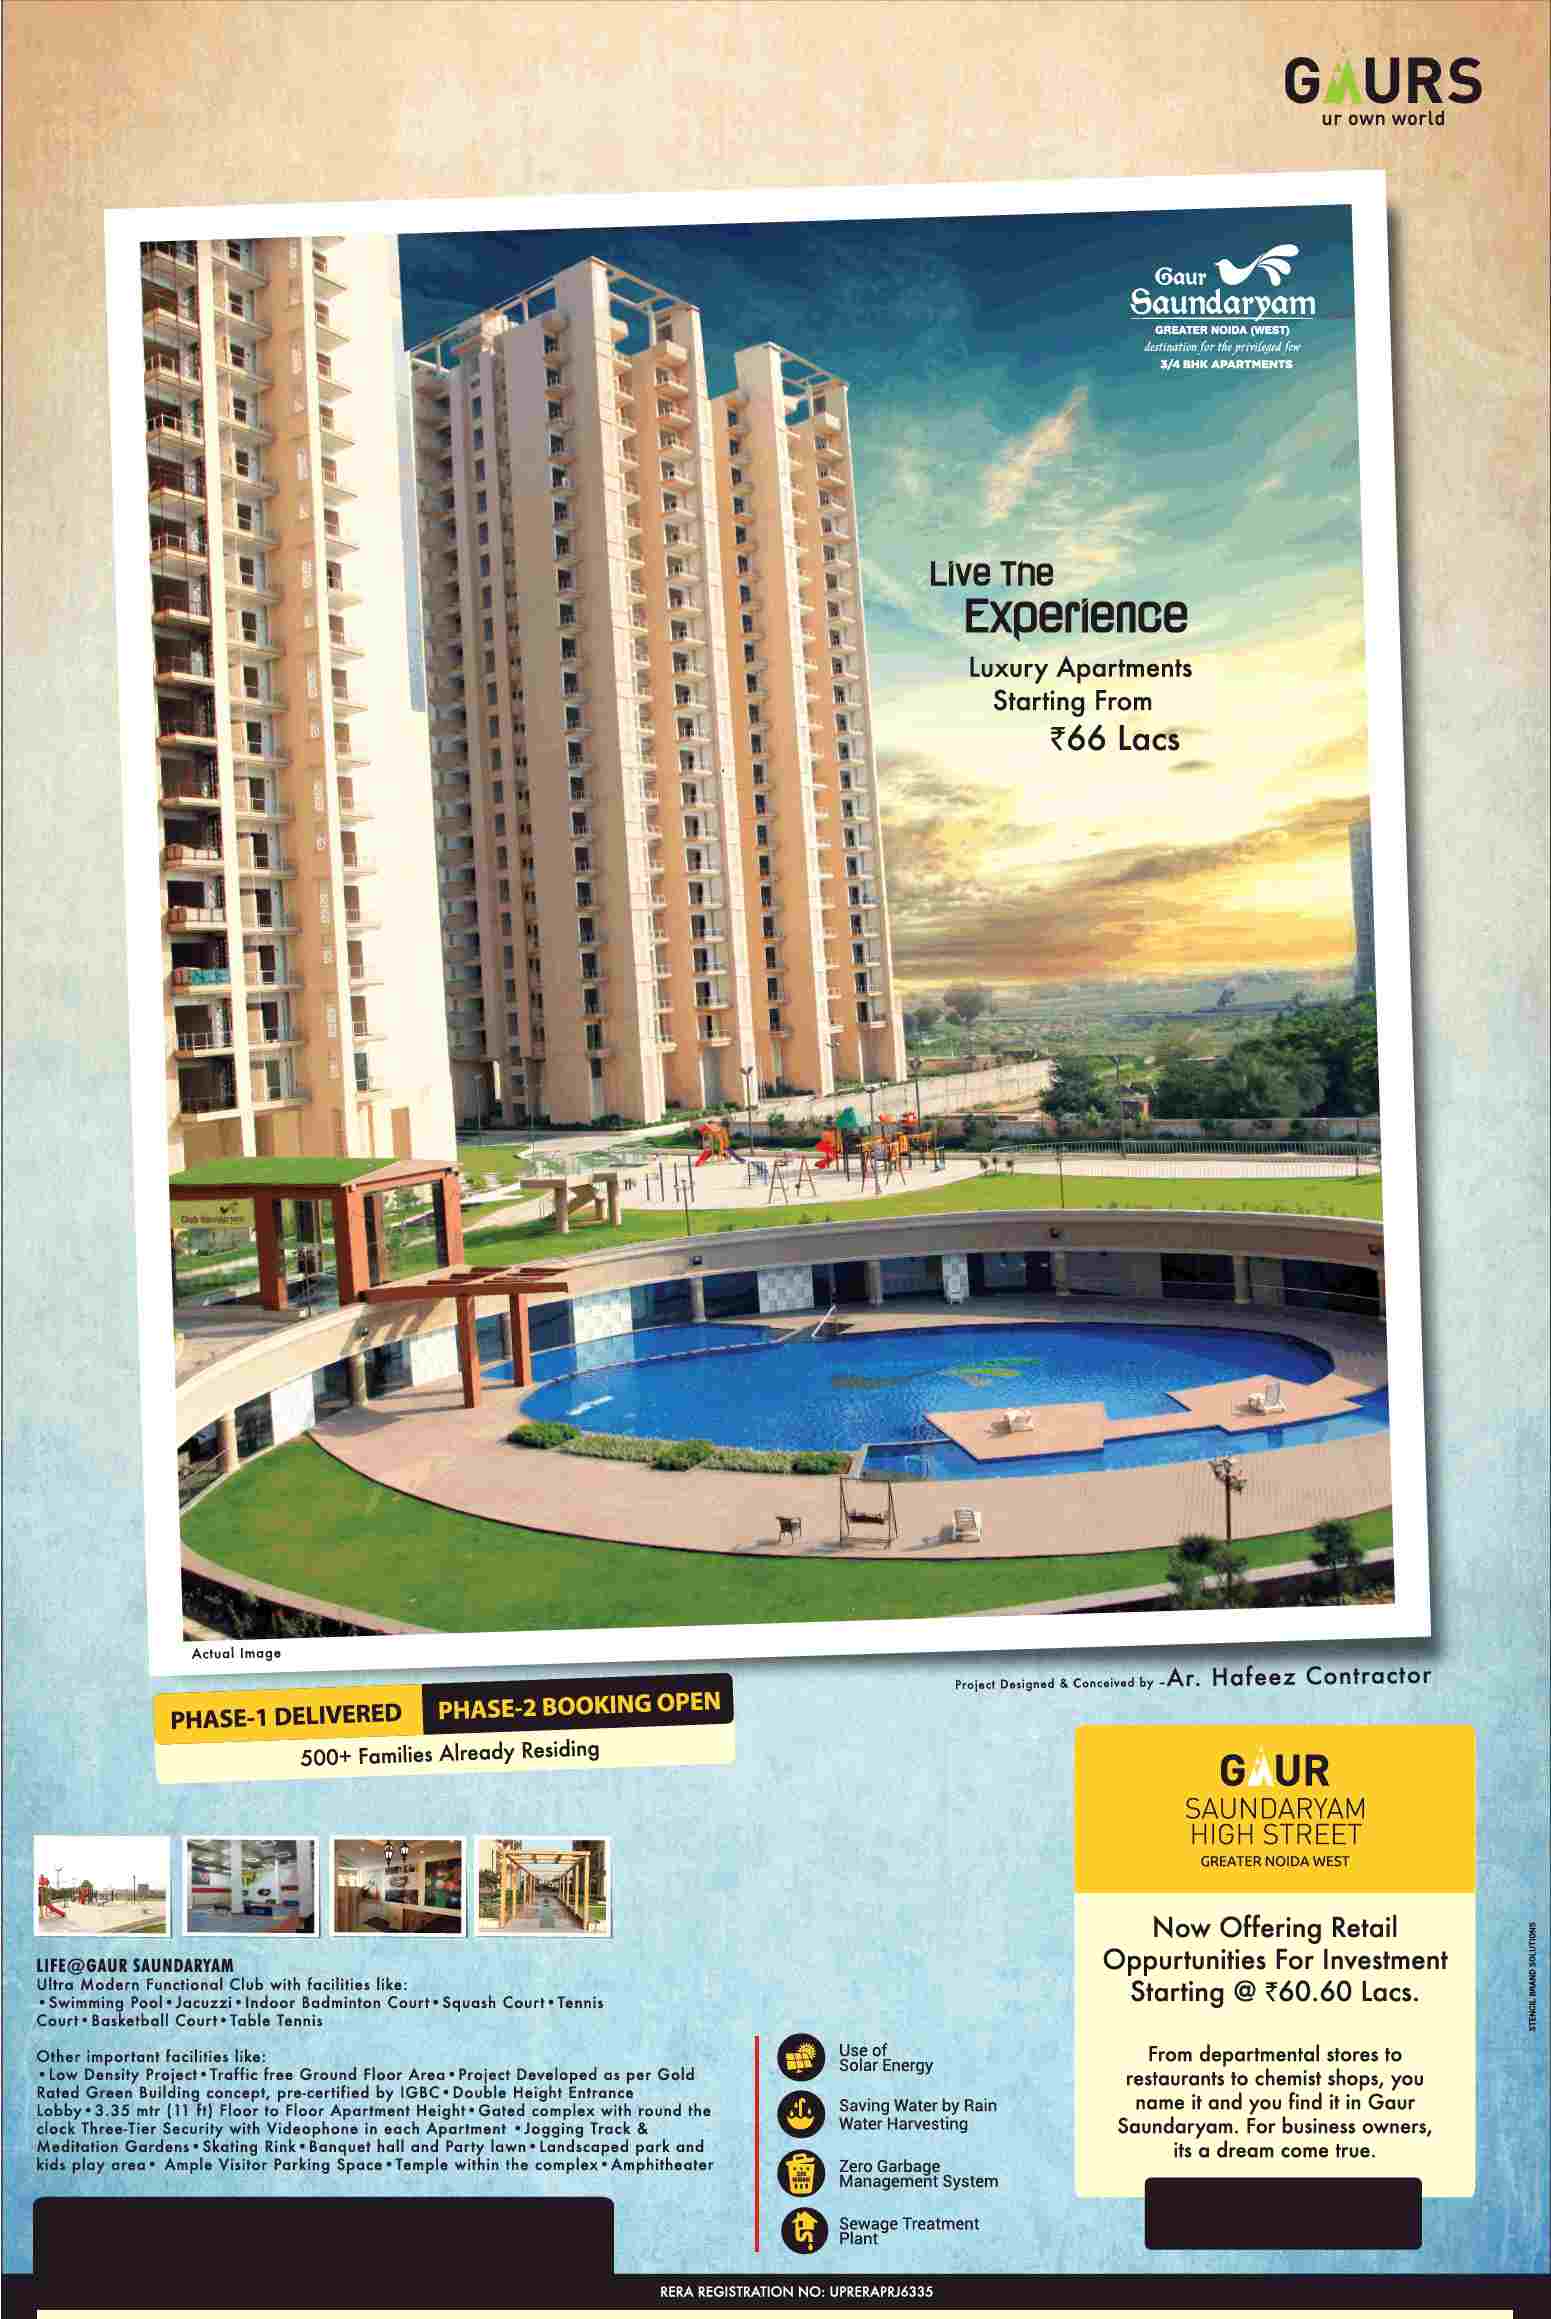 Live a delighted life in luxury apartments at Gaur Saundaryam in Greater Noida Update